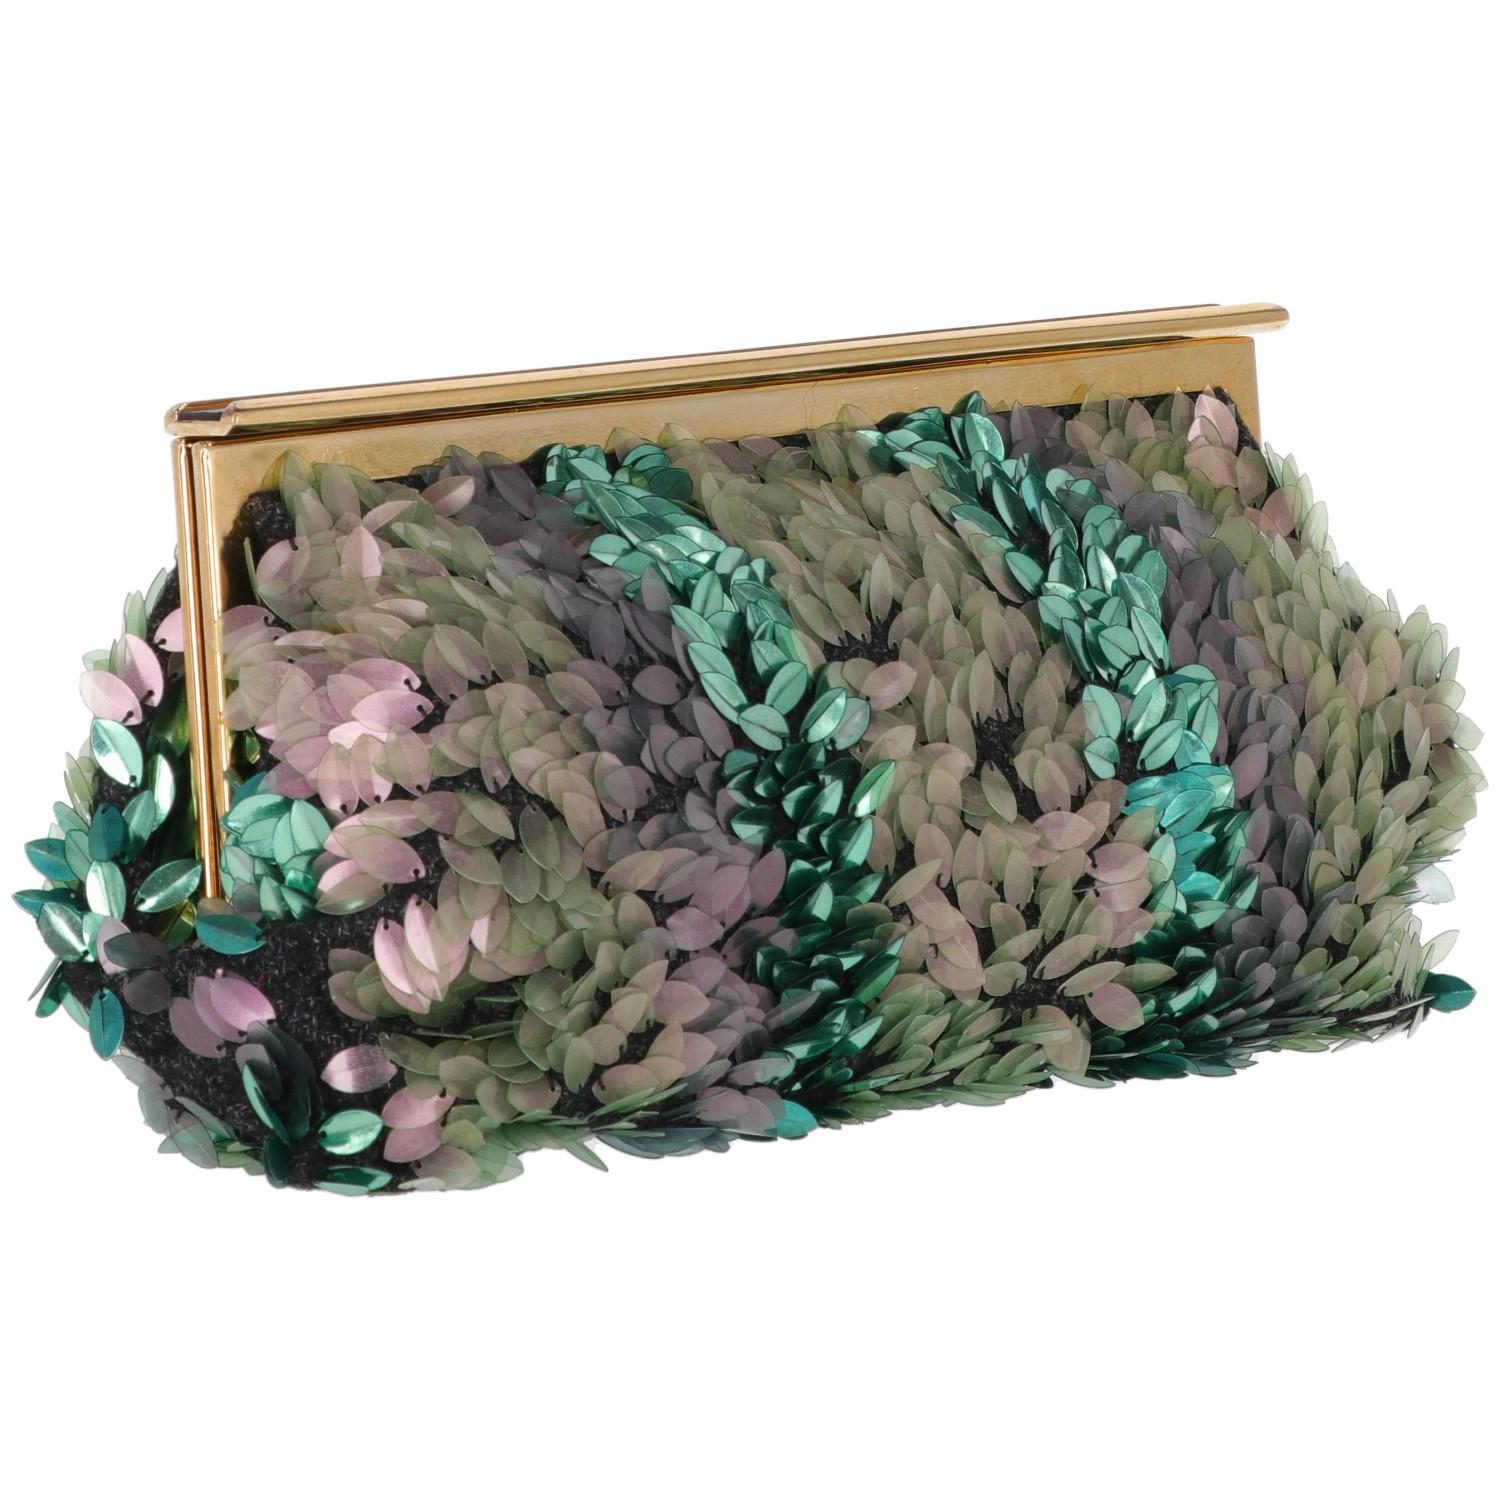 Glamorous Marni black fabric clutch embellished by iridescent green, grey and lilac sequins. The gold-tone metal clasp closure is decorated with a black leather insert. Lining is in beige cotton, with two pockets and brown leather inserts.
The item